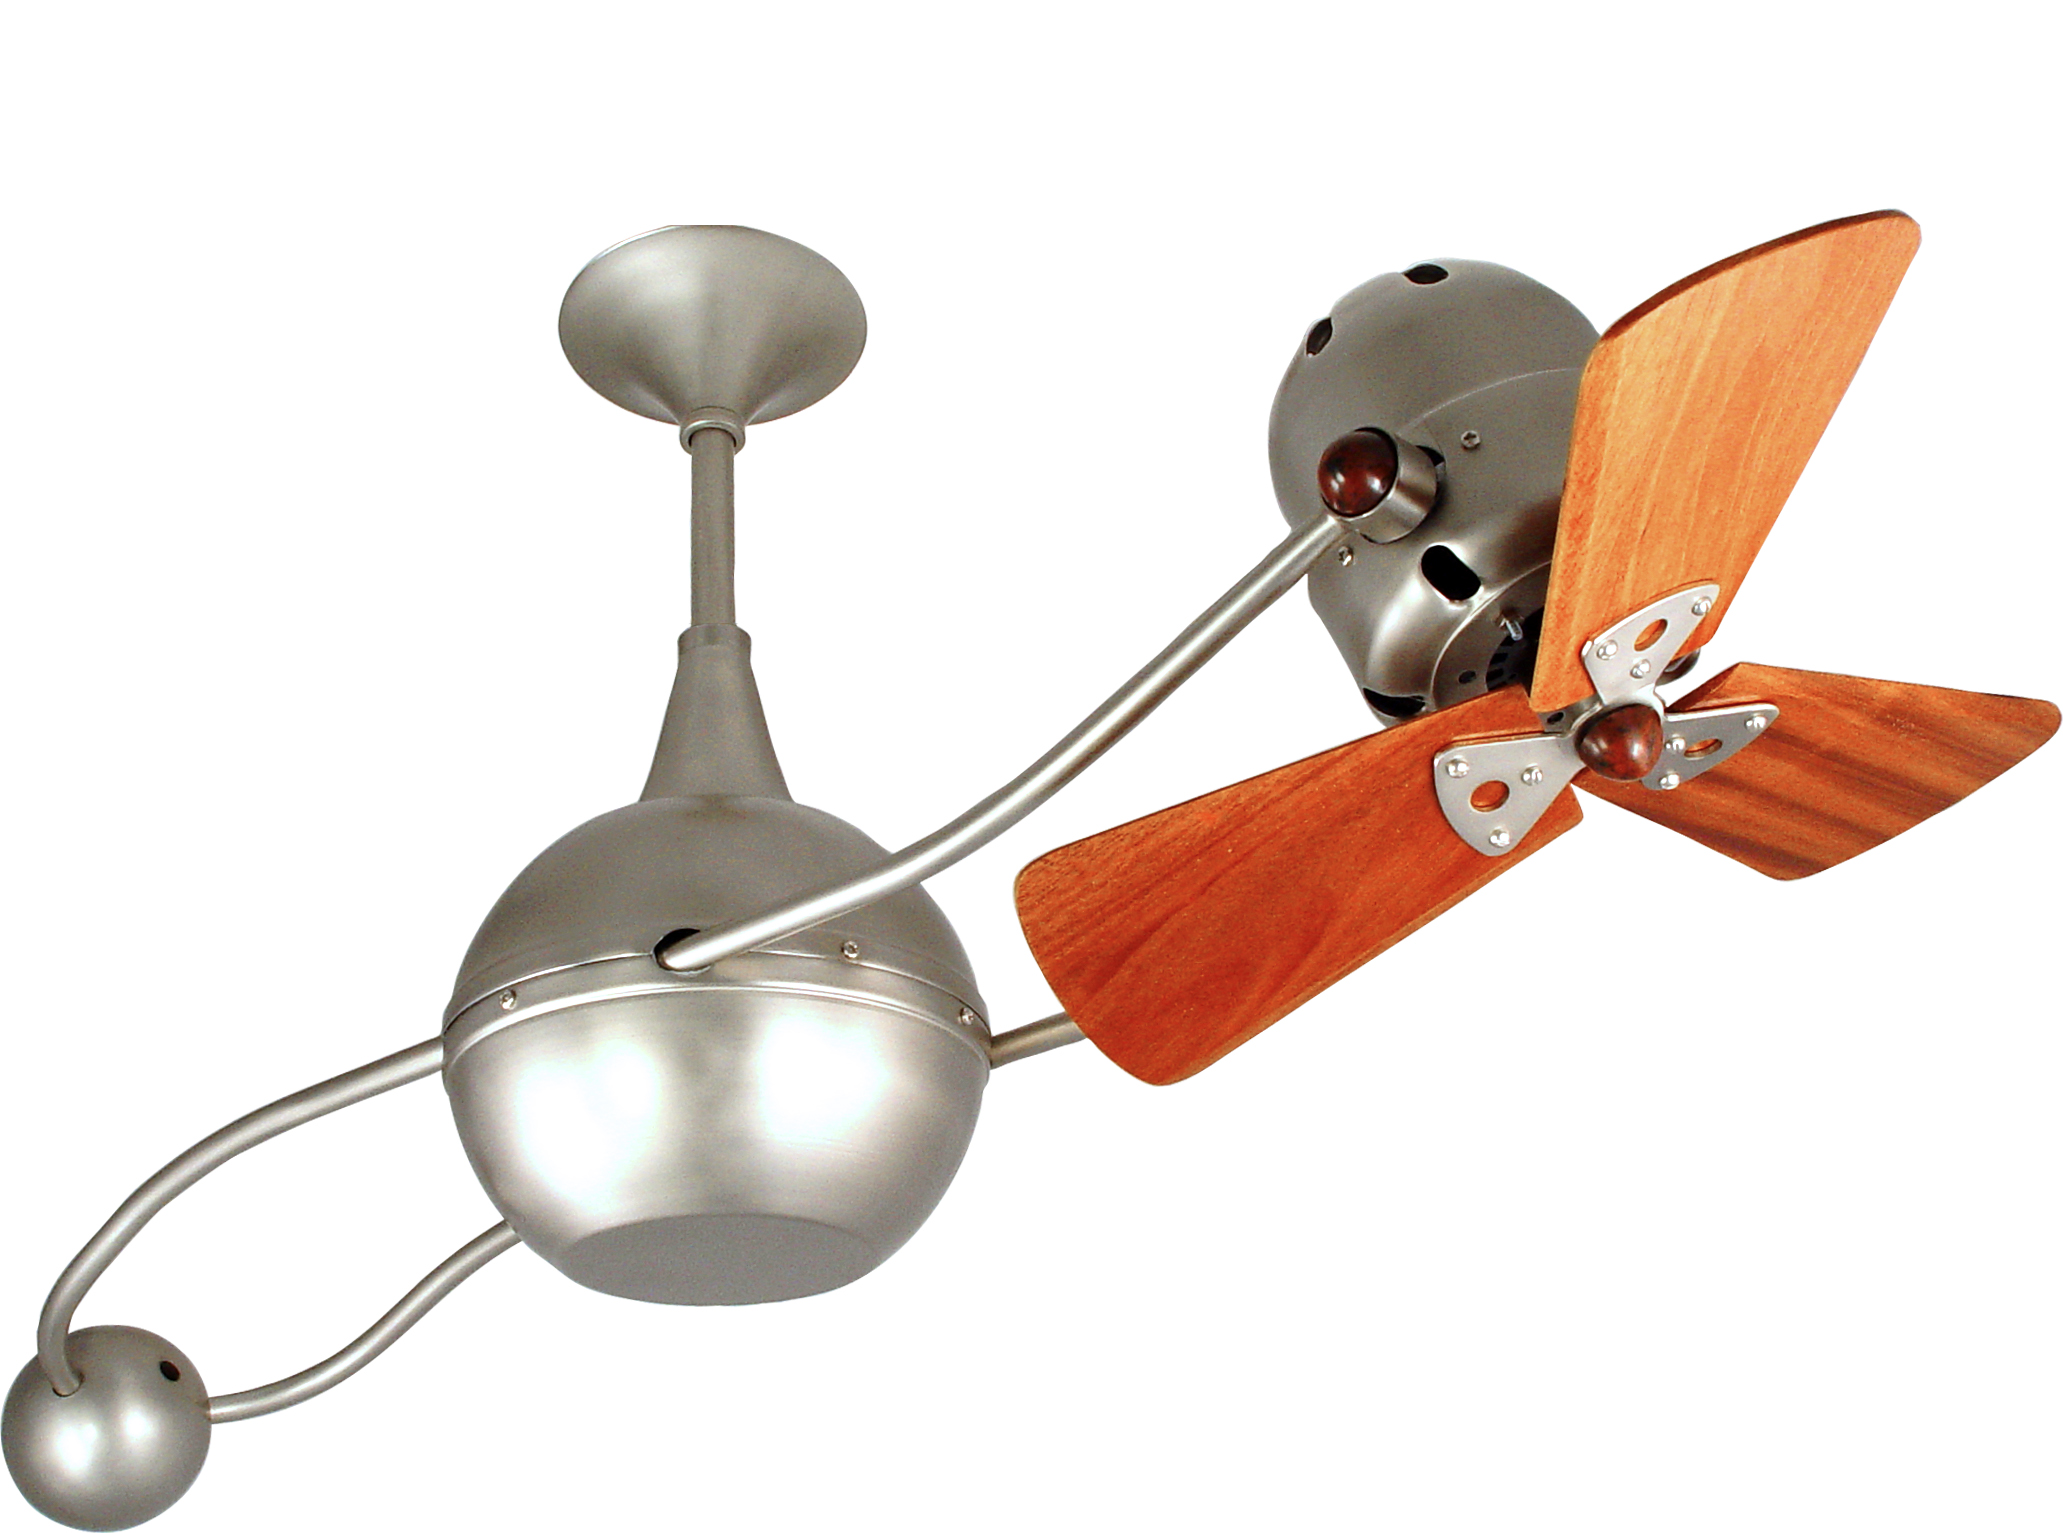 Brisa 2000 Ceiling Fan in Brushed Nickel Finish with Mahogany Wood Blades